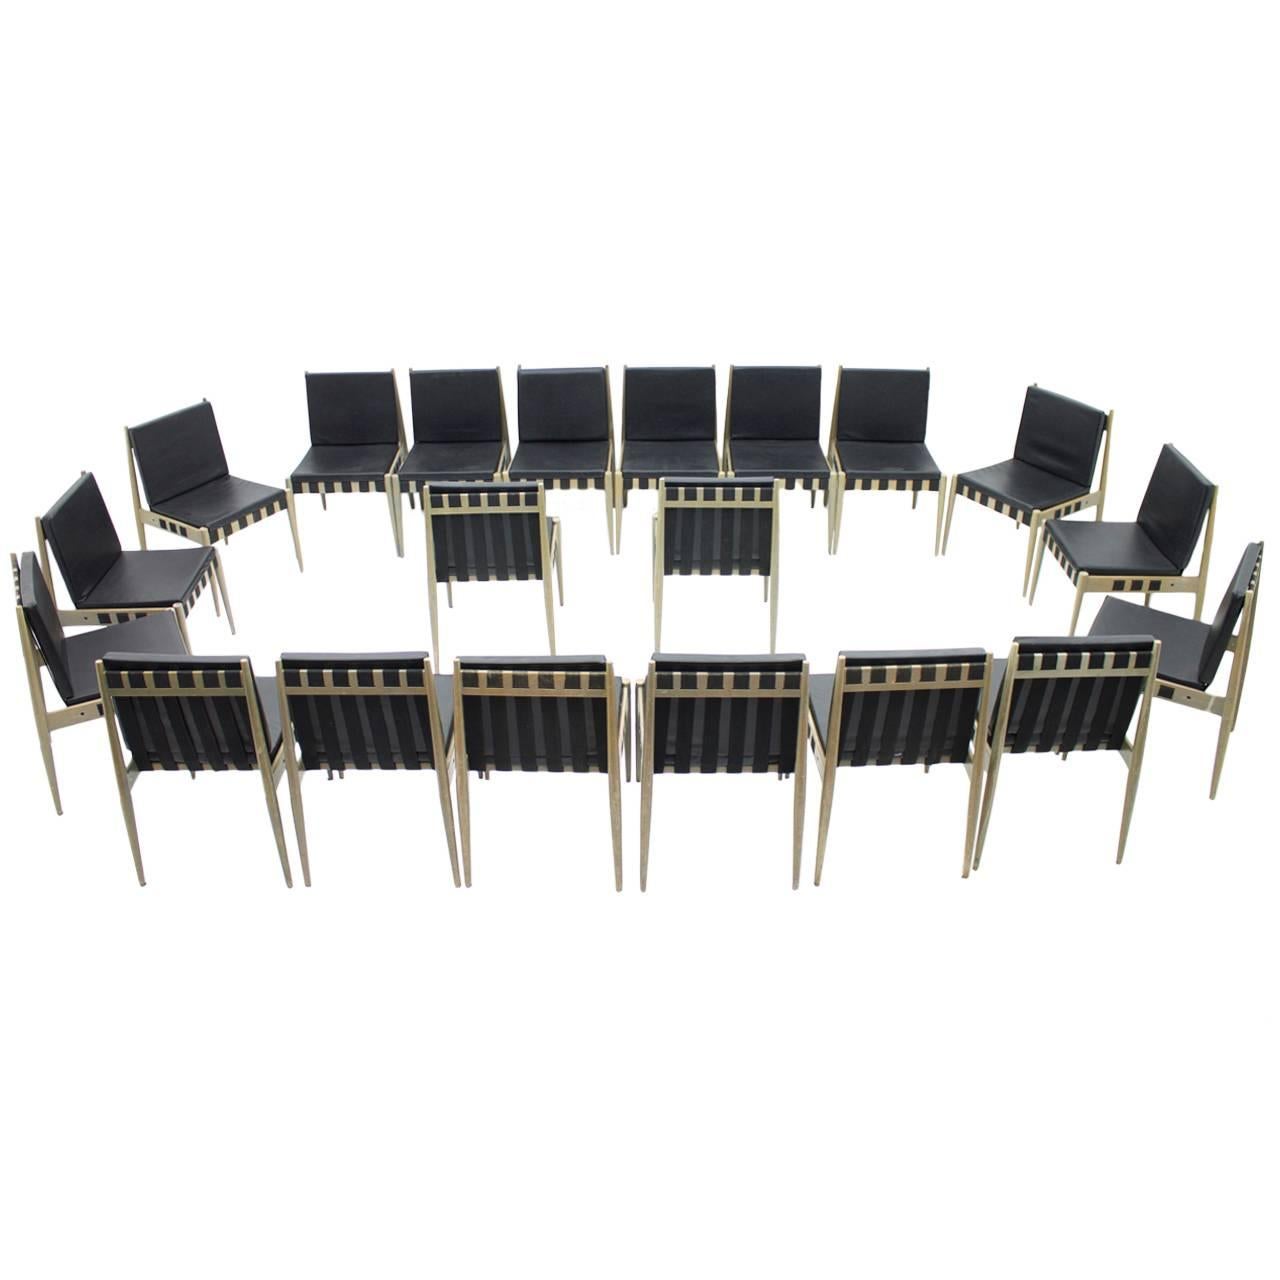 Set of 20 Architect Chairs by Egon Eiermann SE 121, Germany, 1964 For Sale